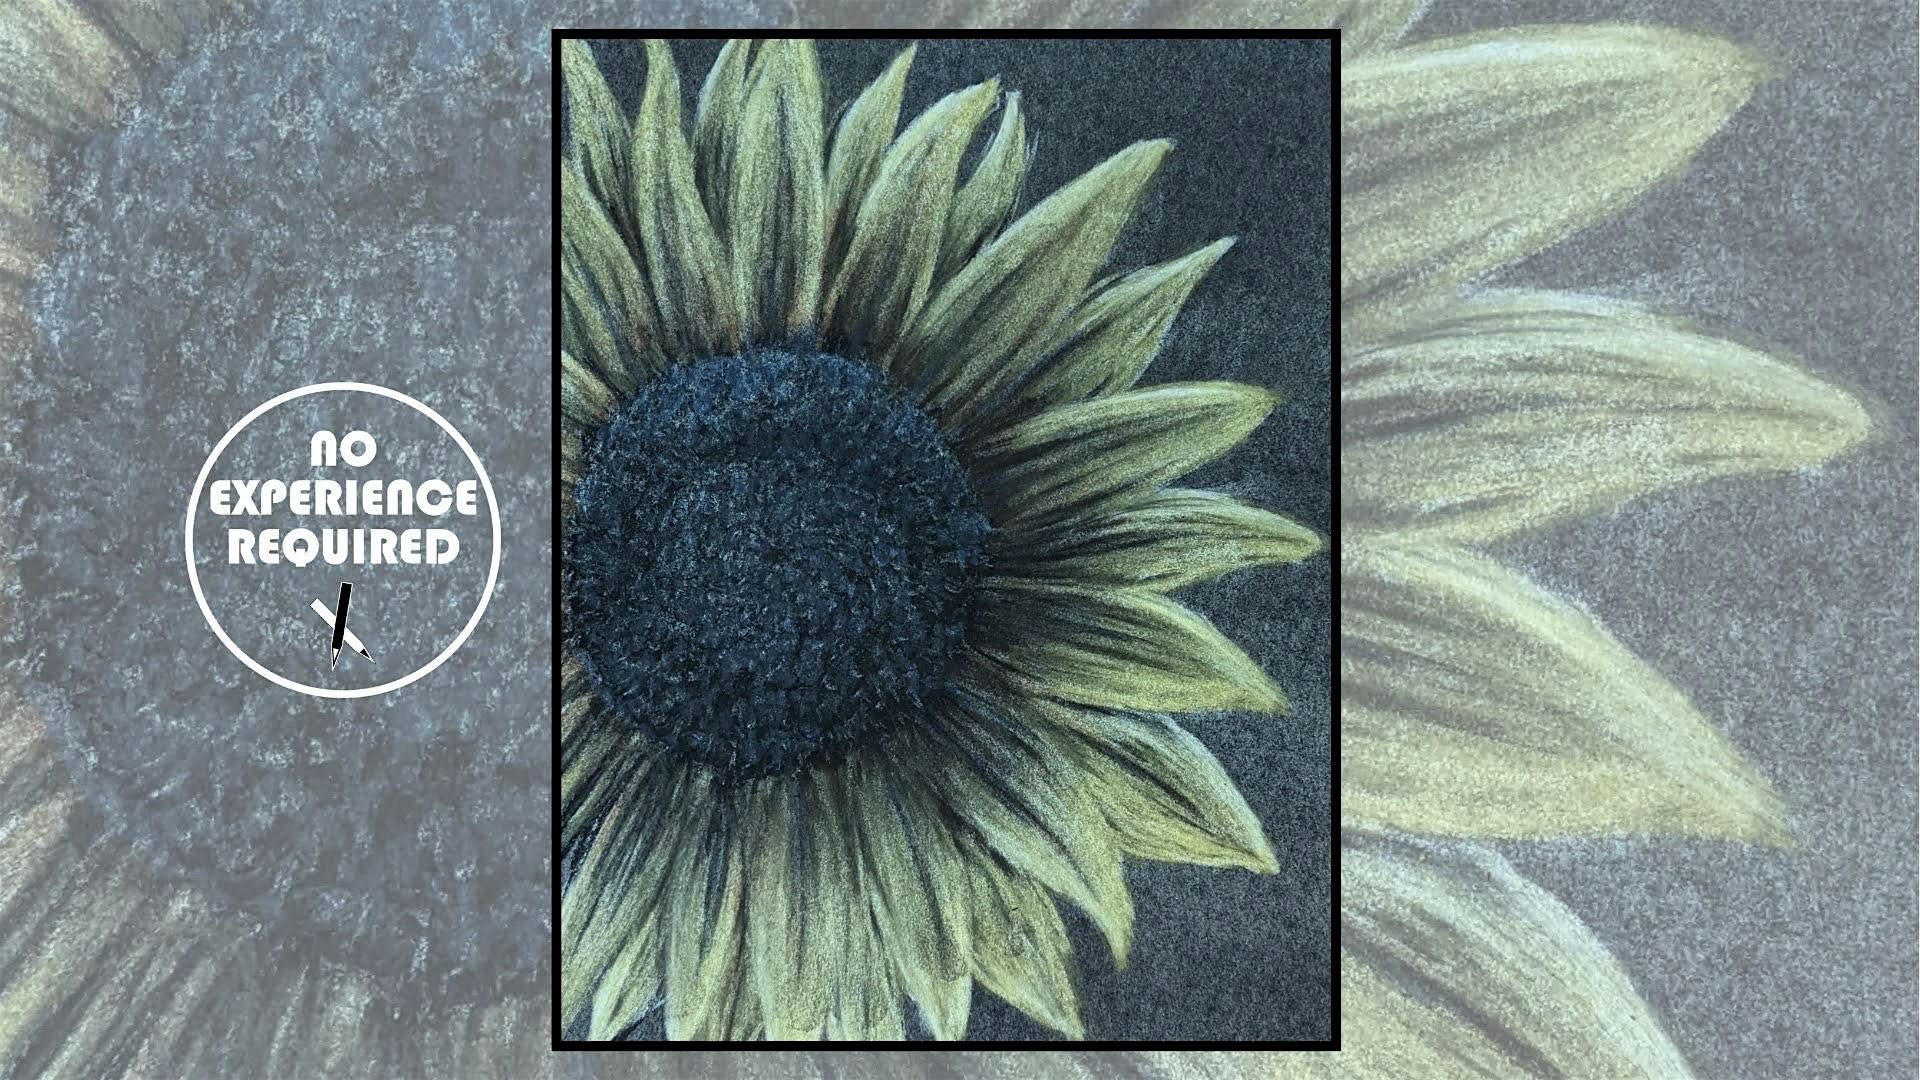 Fundraising Charcoal Drawing Event "Sunflower" in  Richland Center